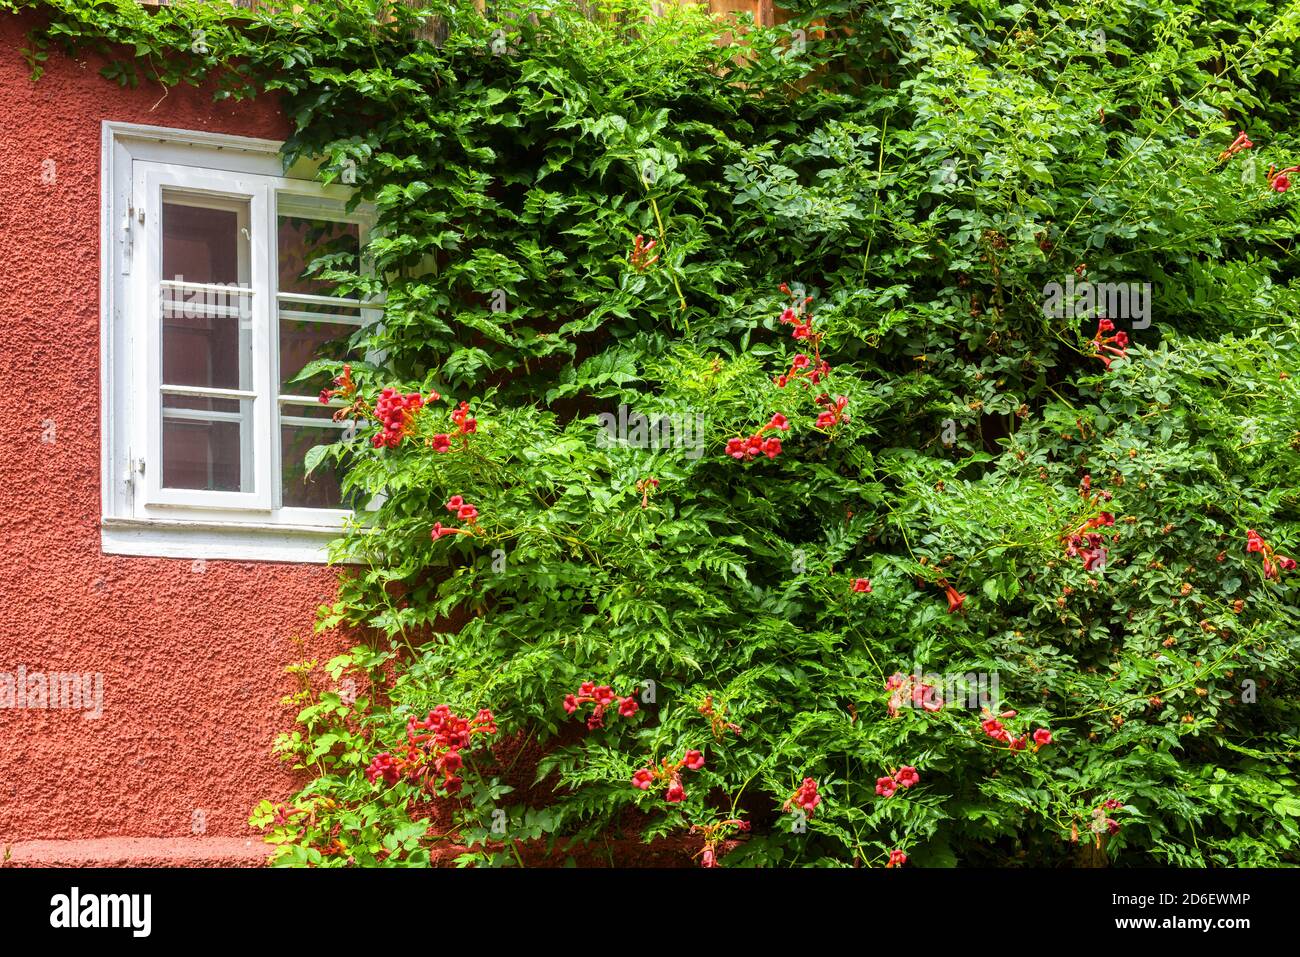 House overgrown with ivy, beautiful exterior covered by green plants and flowers. Outside wall of rural cottage or city building with green foliage an Stock Photo